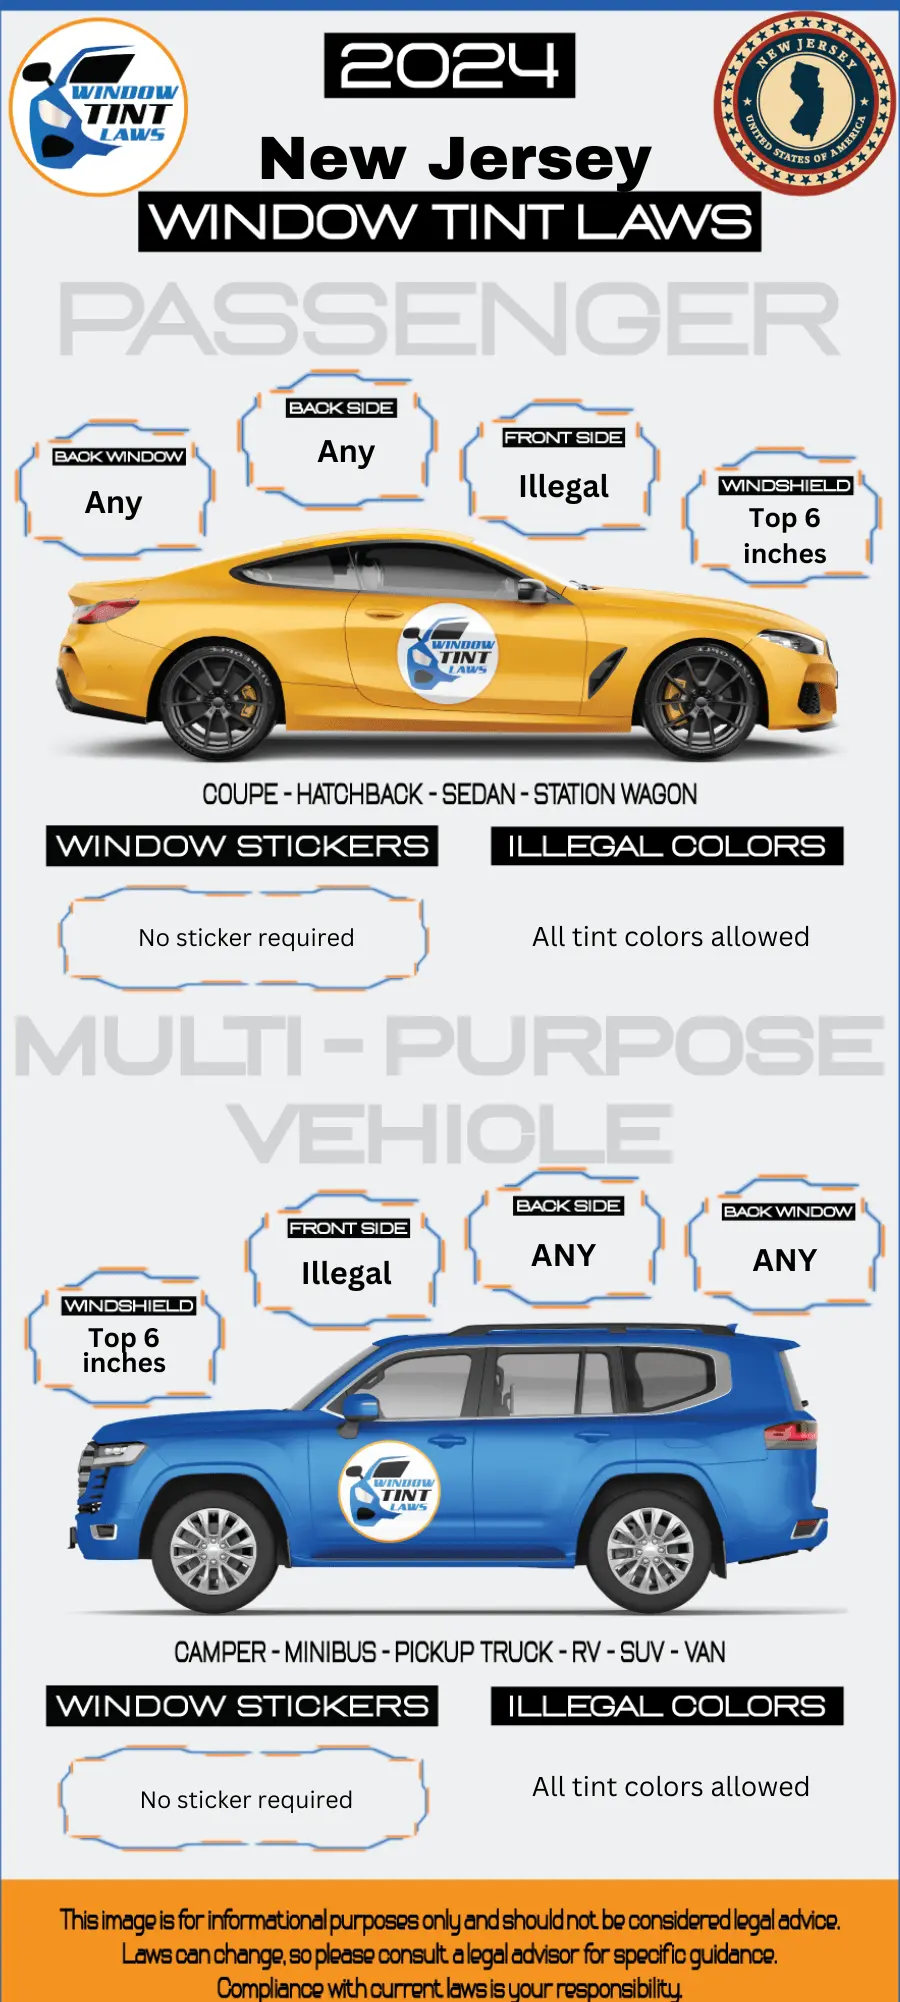 New jersey tint laws - 2024 updated legal tint limit 2